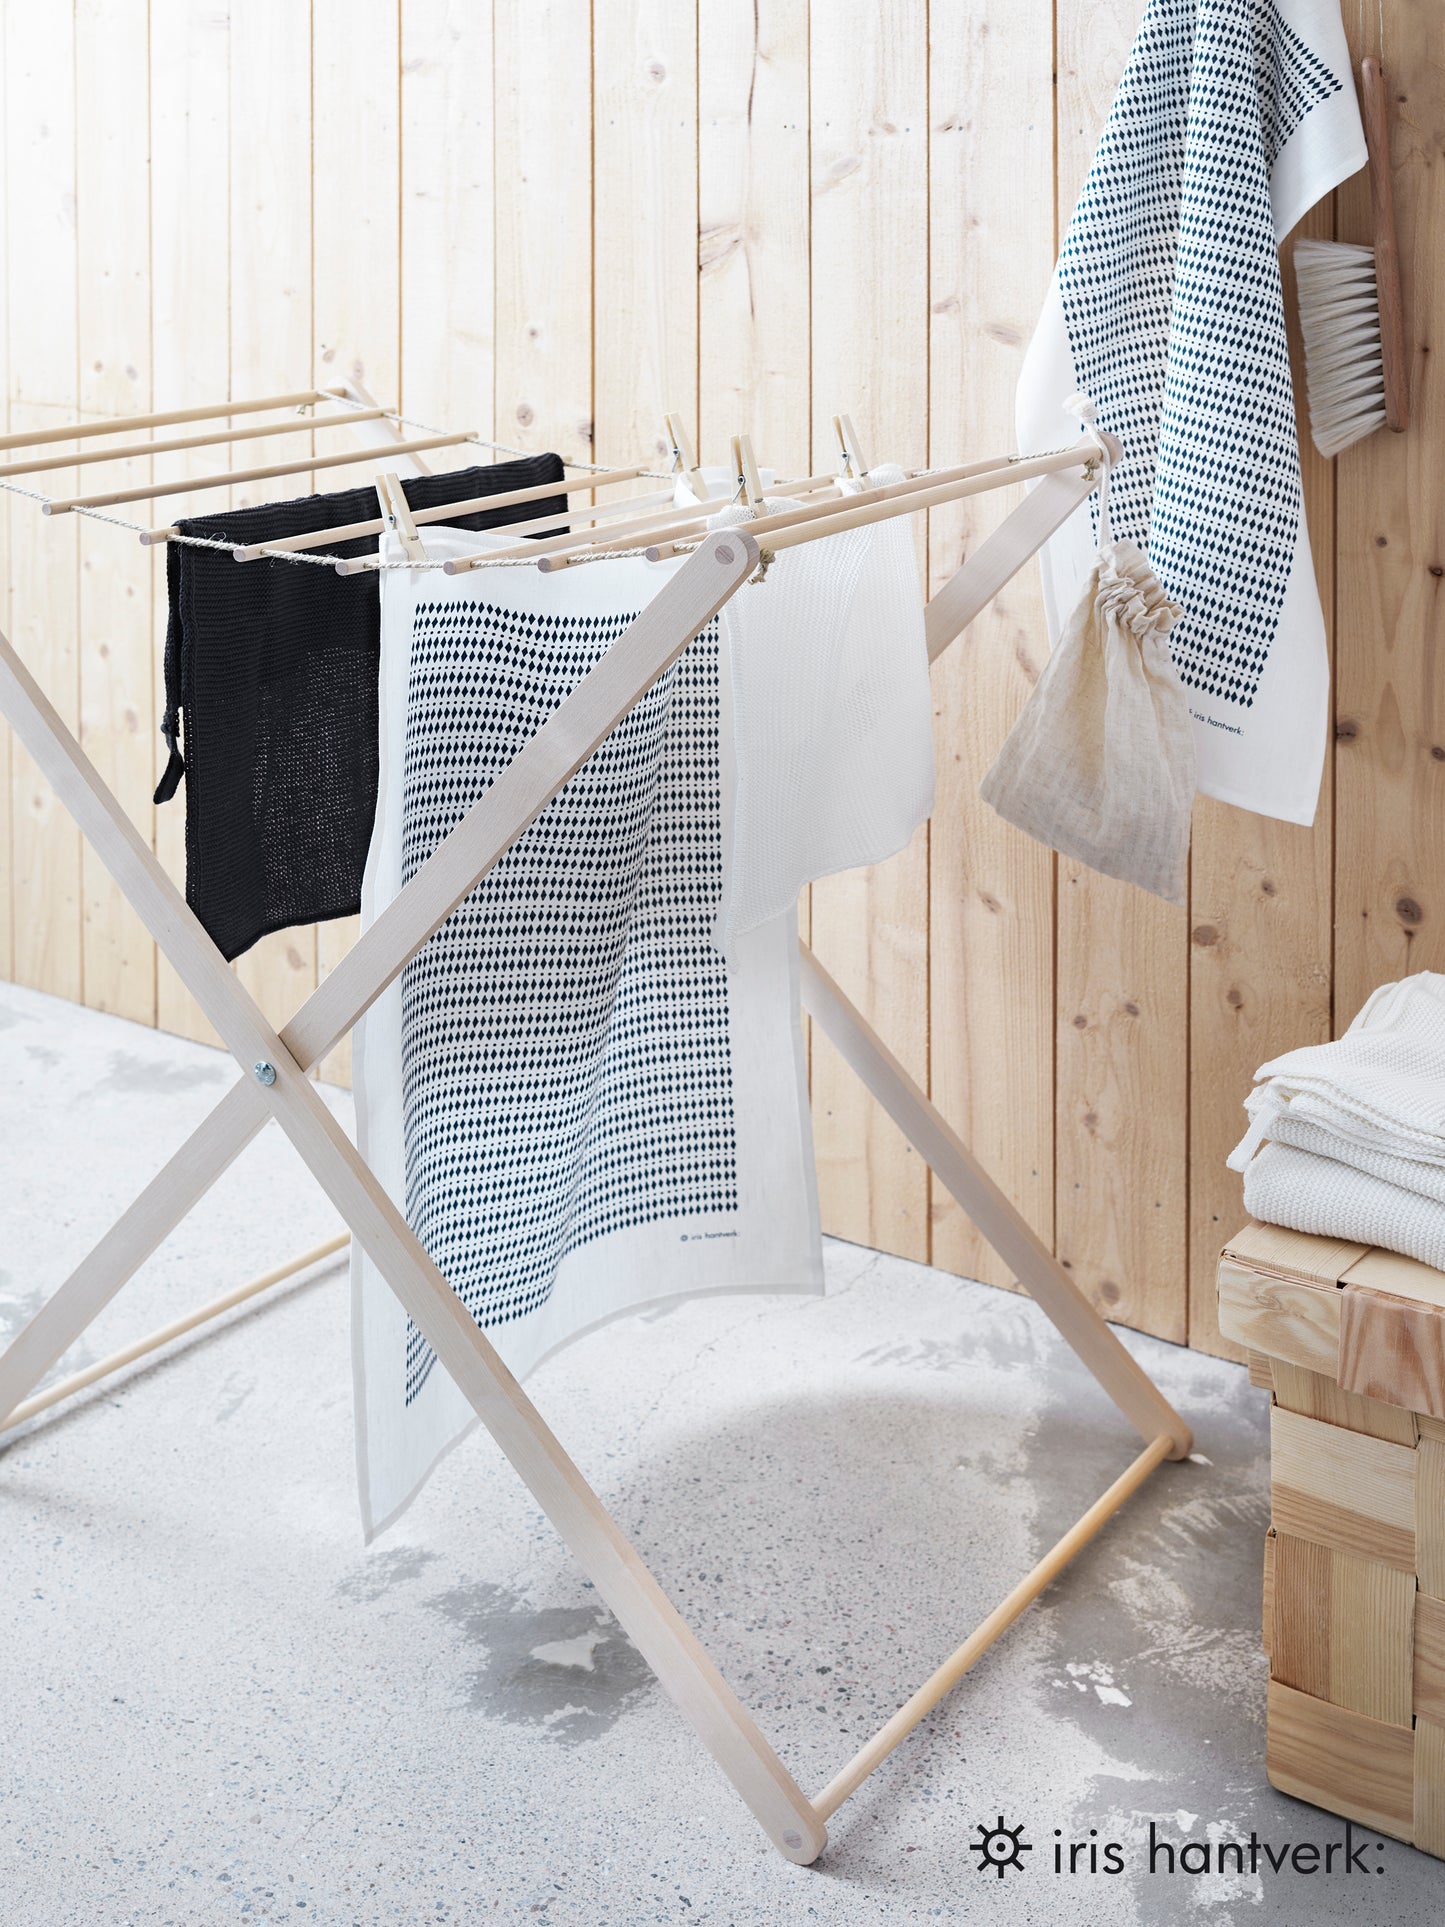 Foldable Birch Wash Dryer Airer